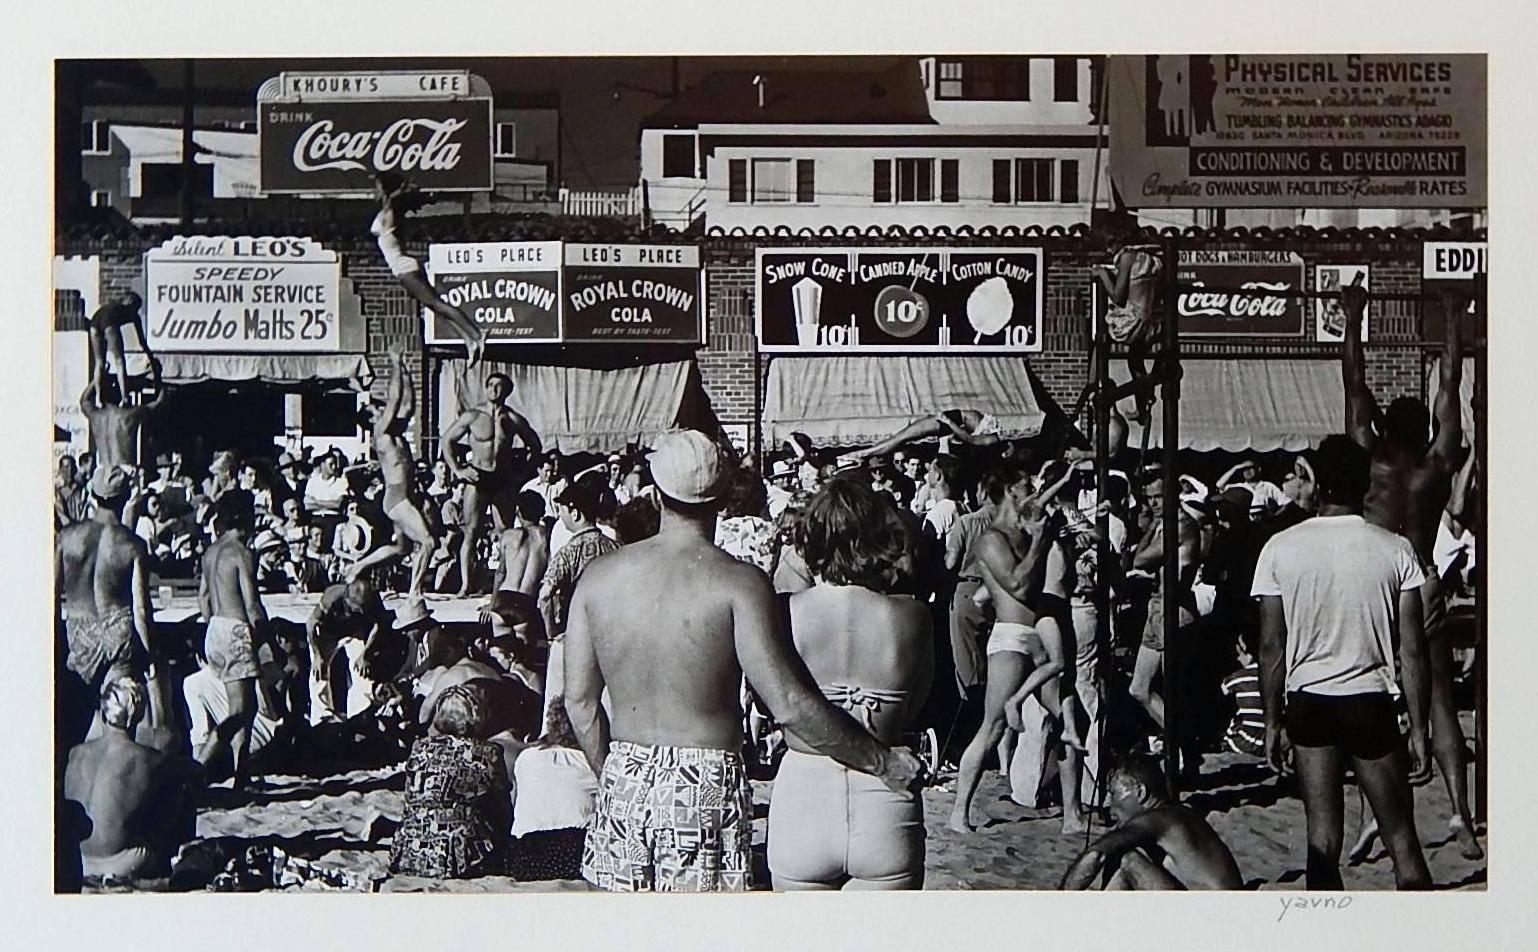 Vintage photo by noted photographer Max Yavno (1911-1985).
This scene depicts the original Muscle Beach at Santa Monica
before it was moved to Venice Beach.
Framed silver gelatin print, signed in pencil.
Image size: 8" H x 13.38" W,